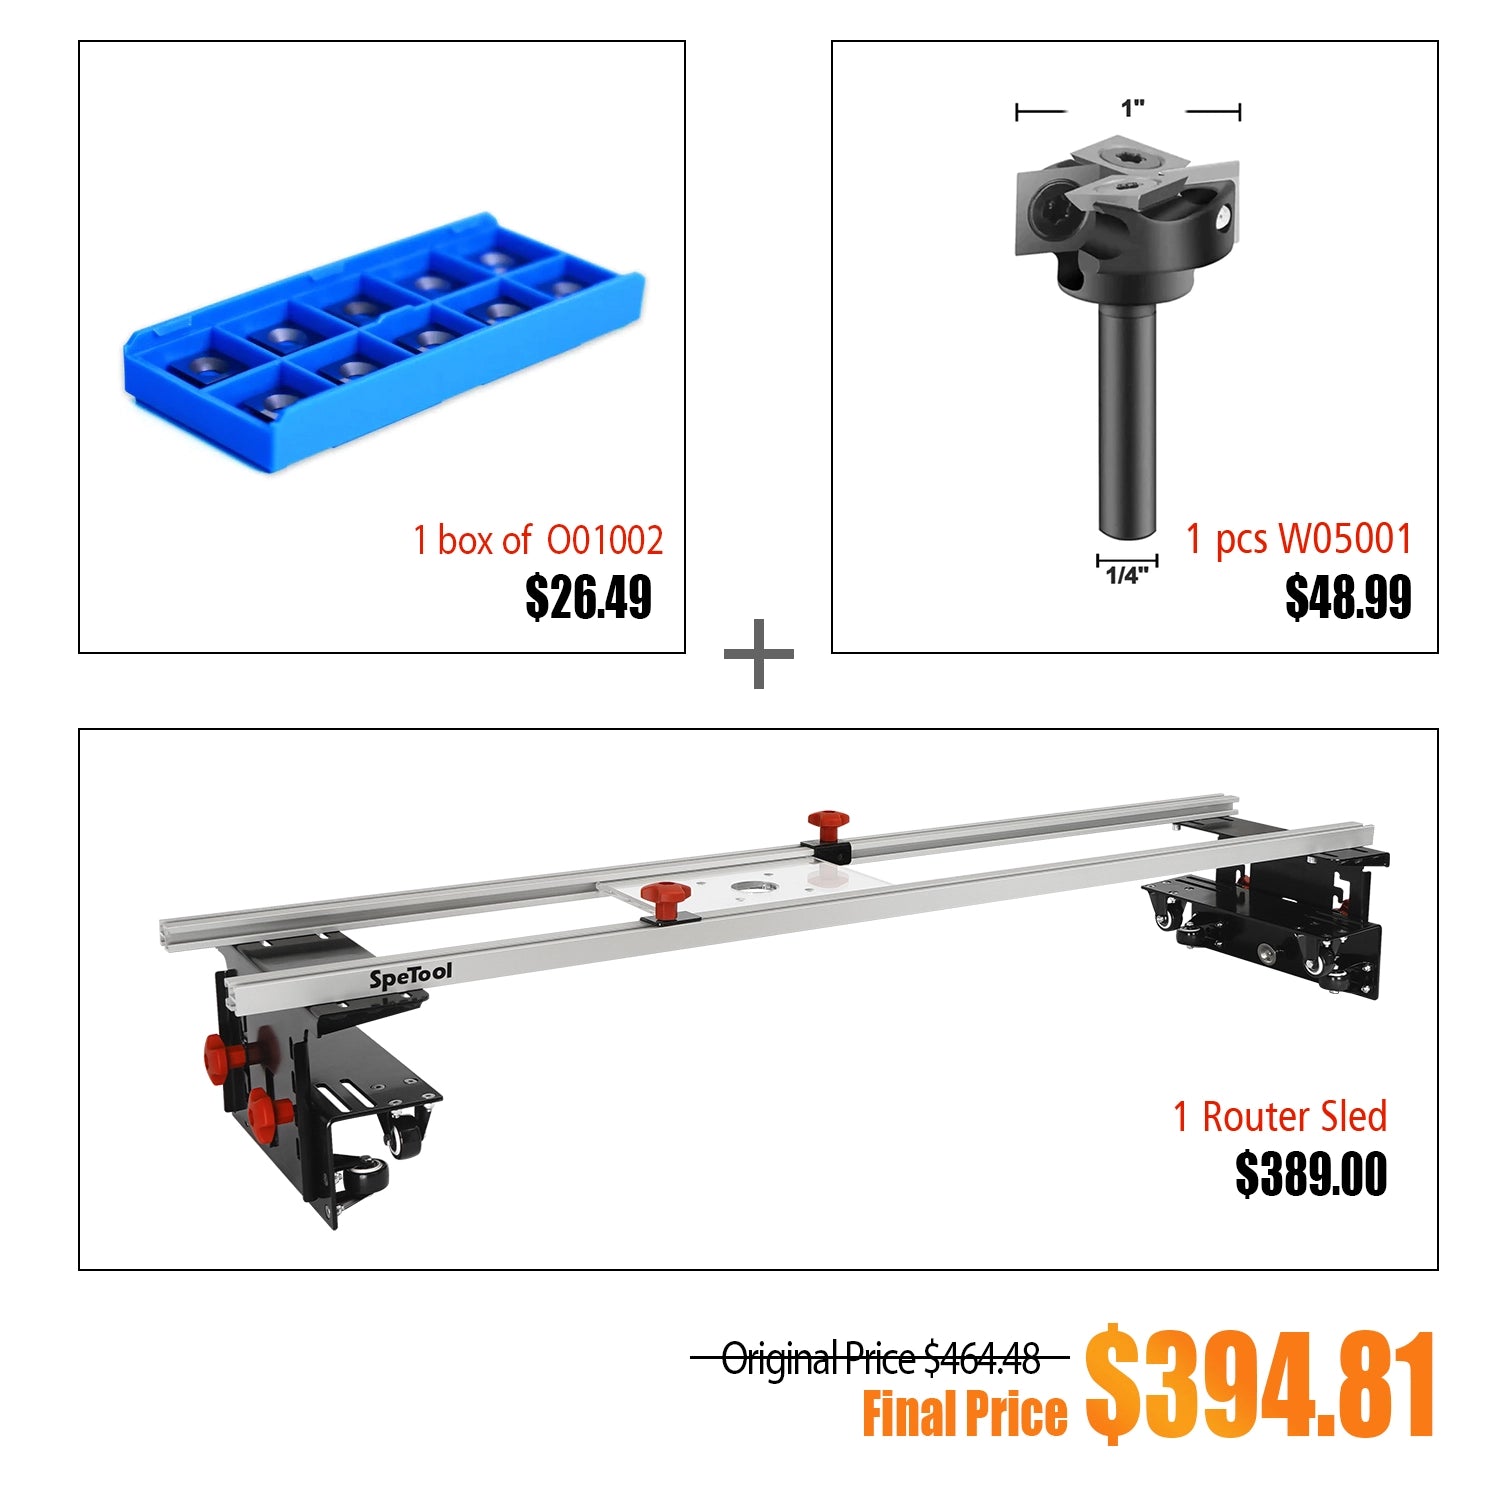 !!!【Pre-ordering】Bundle buying Save Up To $74 | SpeTool Cratos S01001 Machinist-Grade Router Sled & Spoilboard Surfacing Bits & Carbide Insert Kits-4